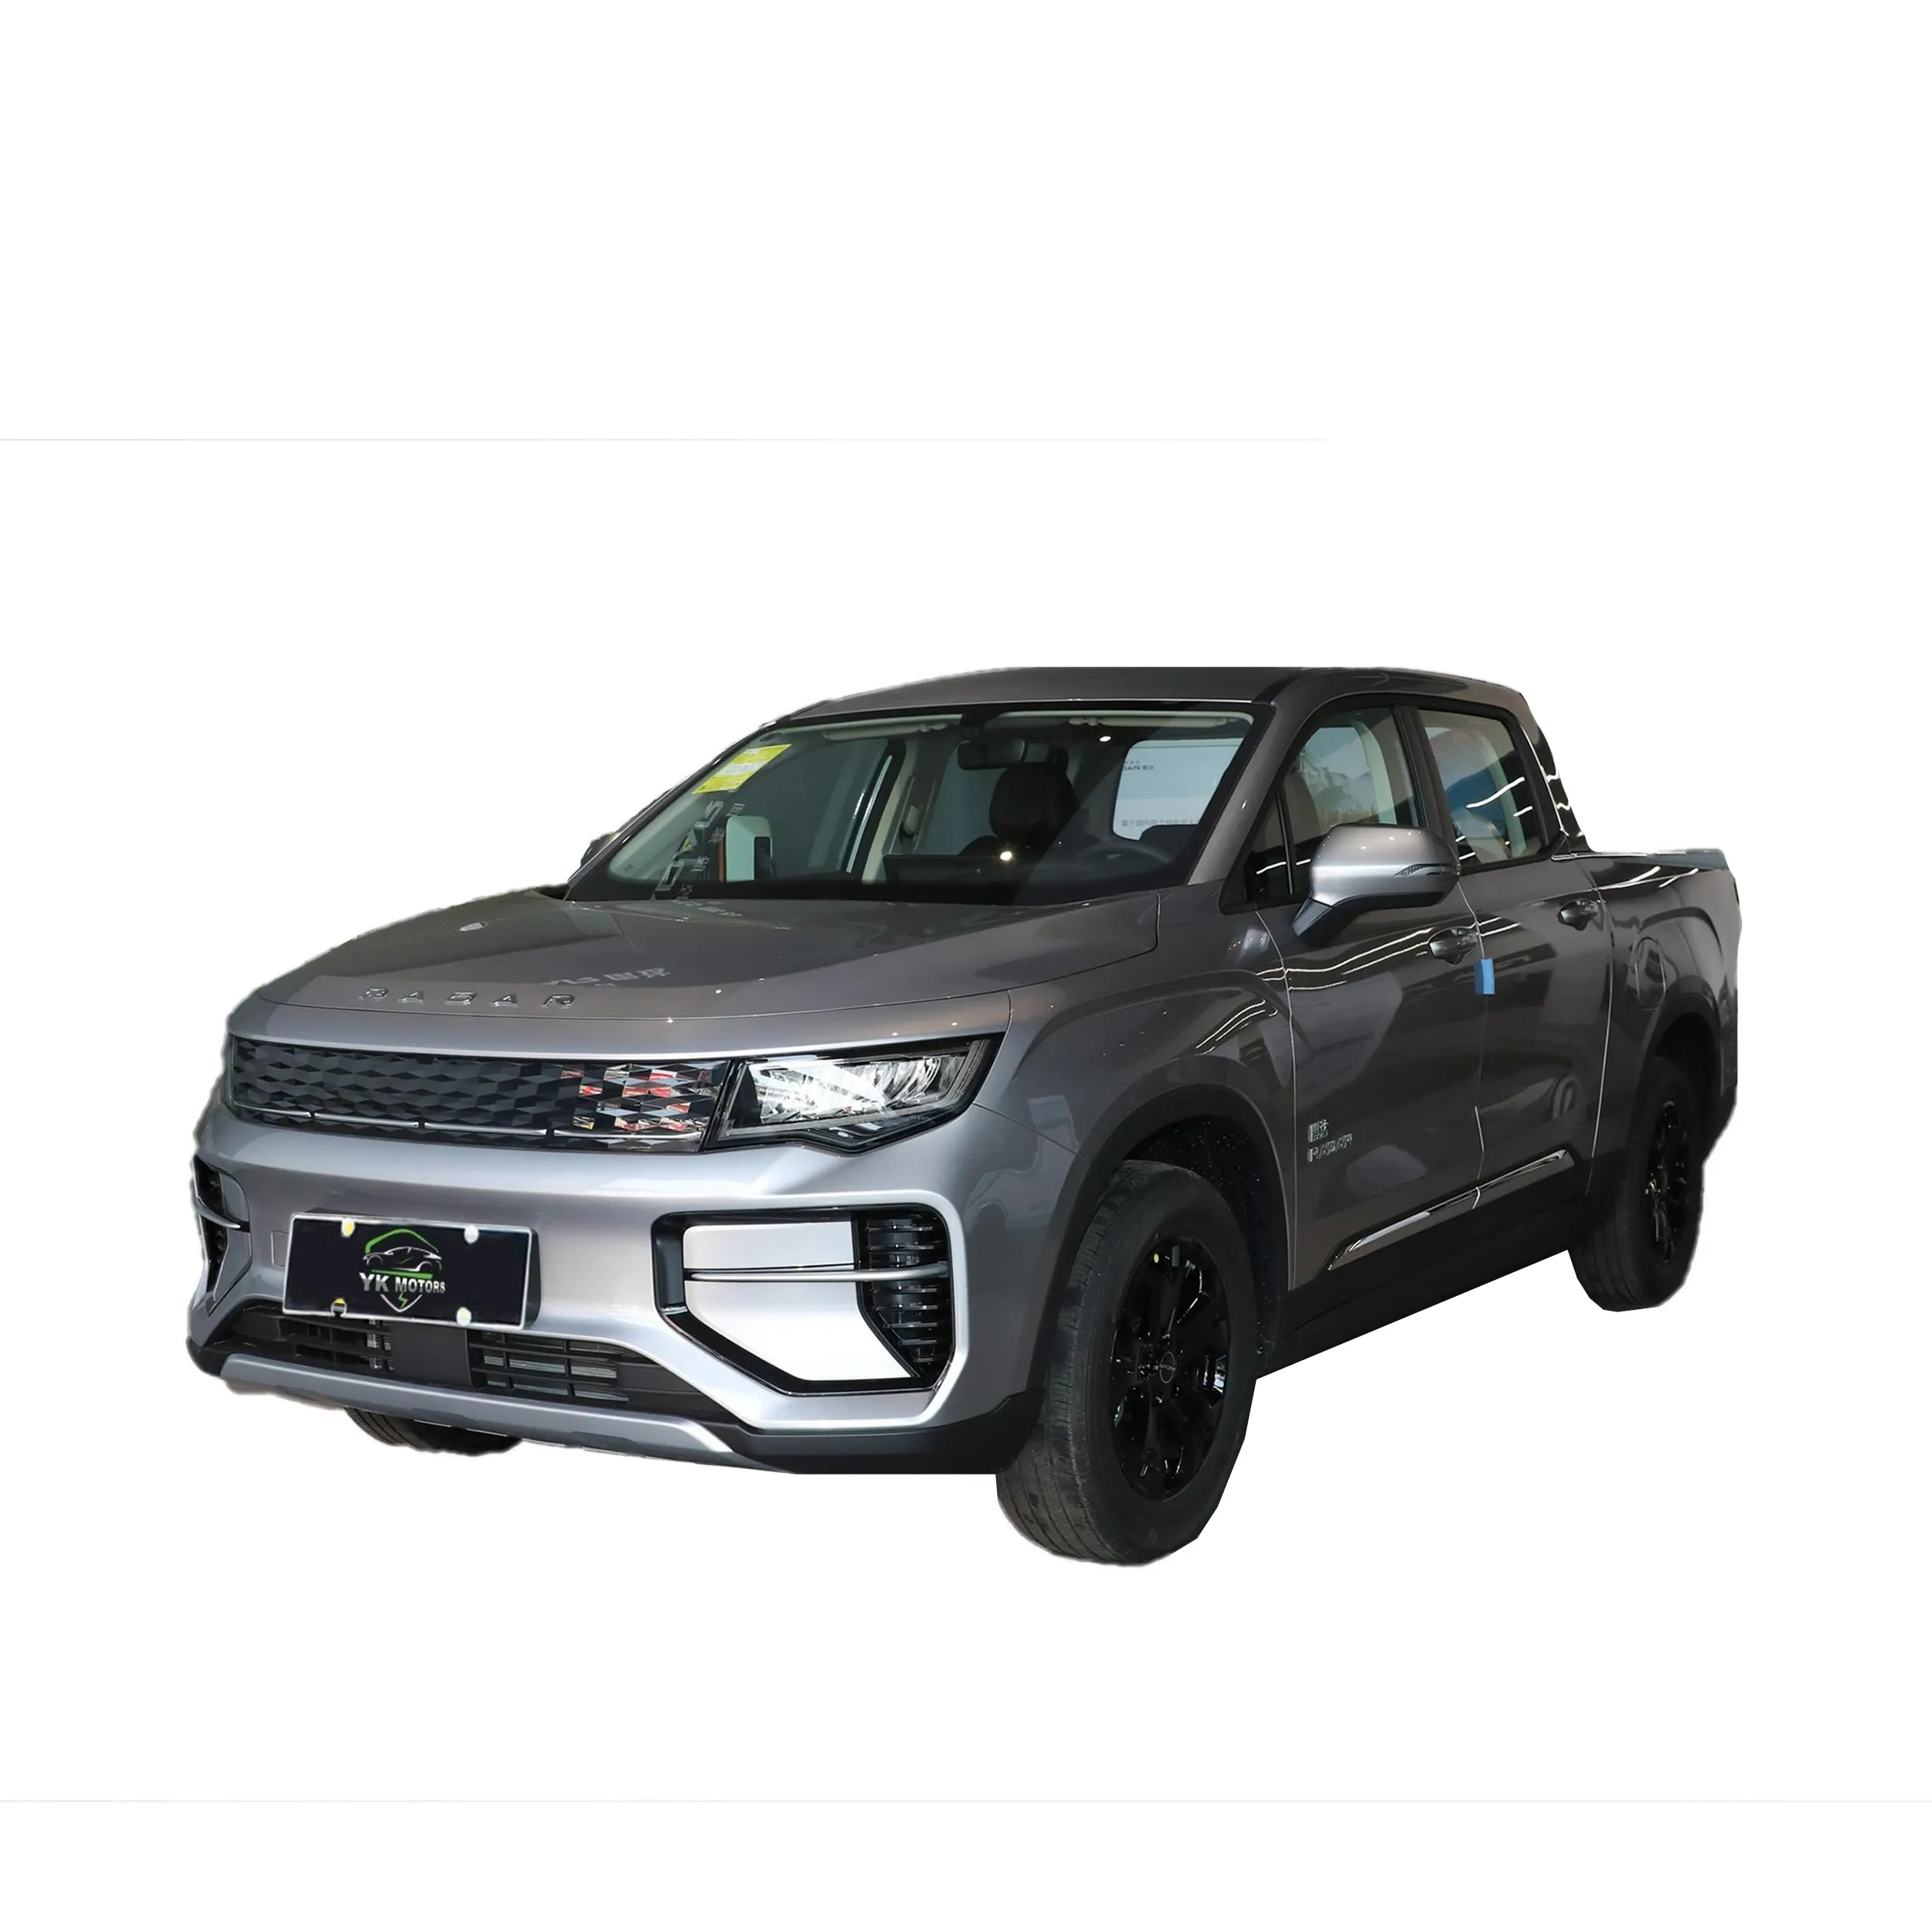 Pure Electric Car Gelly RD6 Midsize Pickup Radar 6 Pick Up Camper Electric Car Geely Radar RD6 New Energy Vehicle Pickup Truck